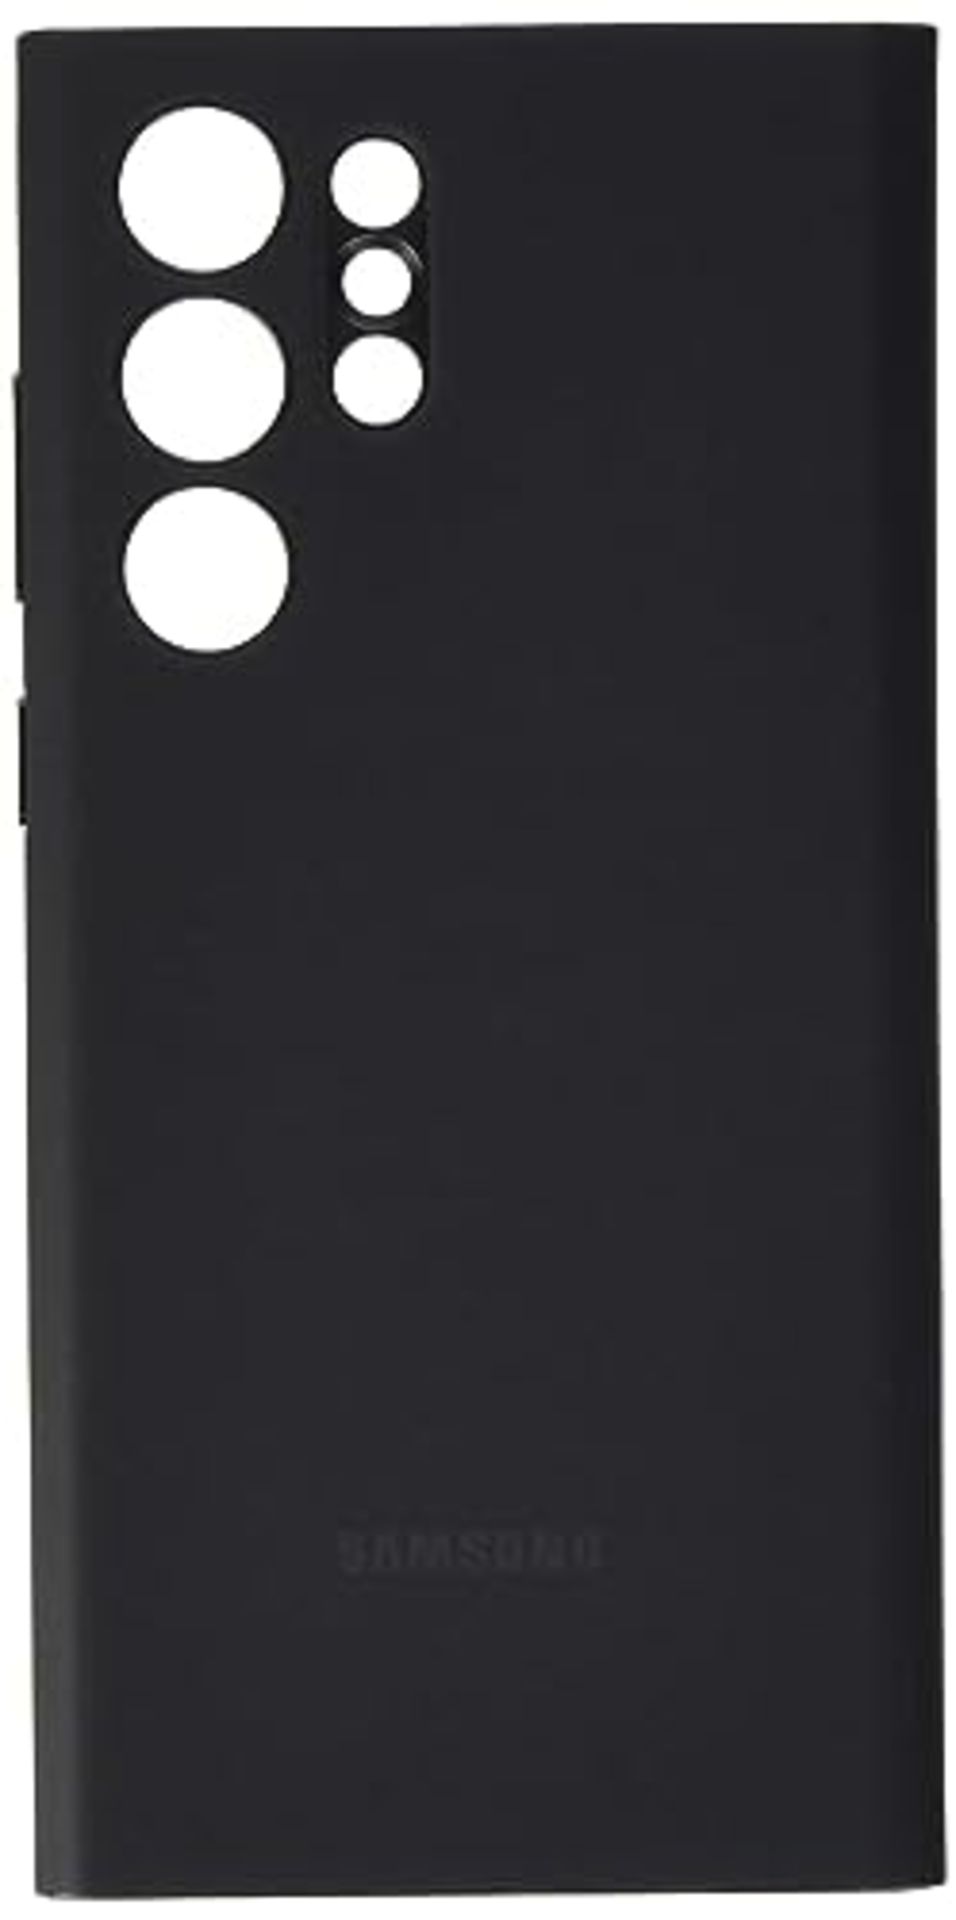 Samsung Official S22 Ultra Smart Clear View Cover Black